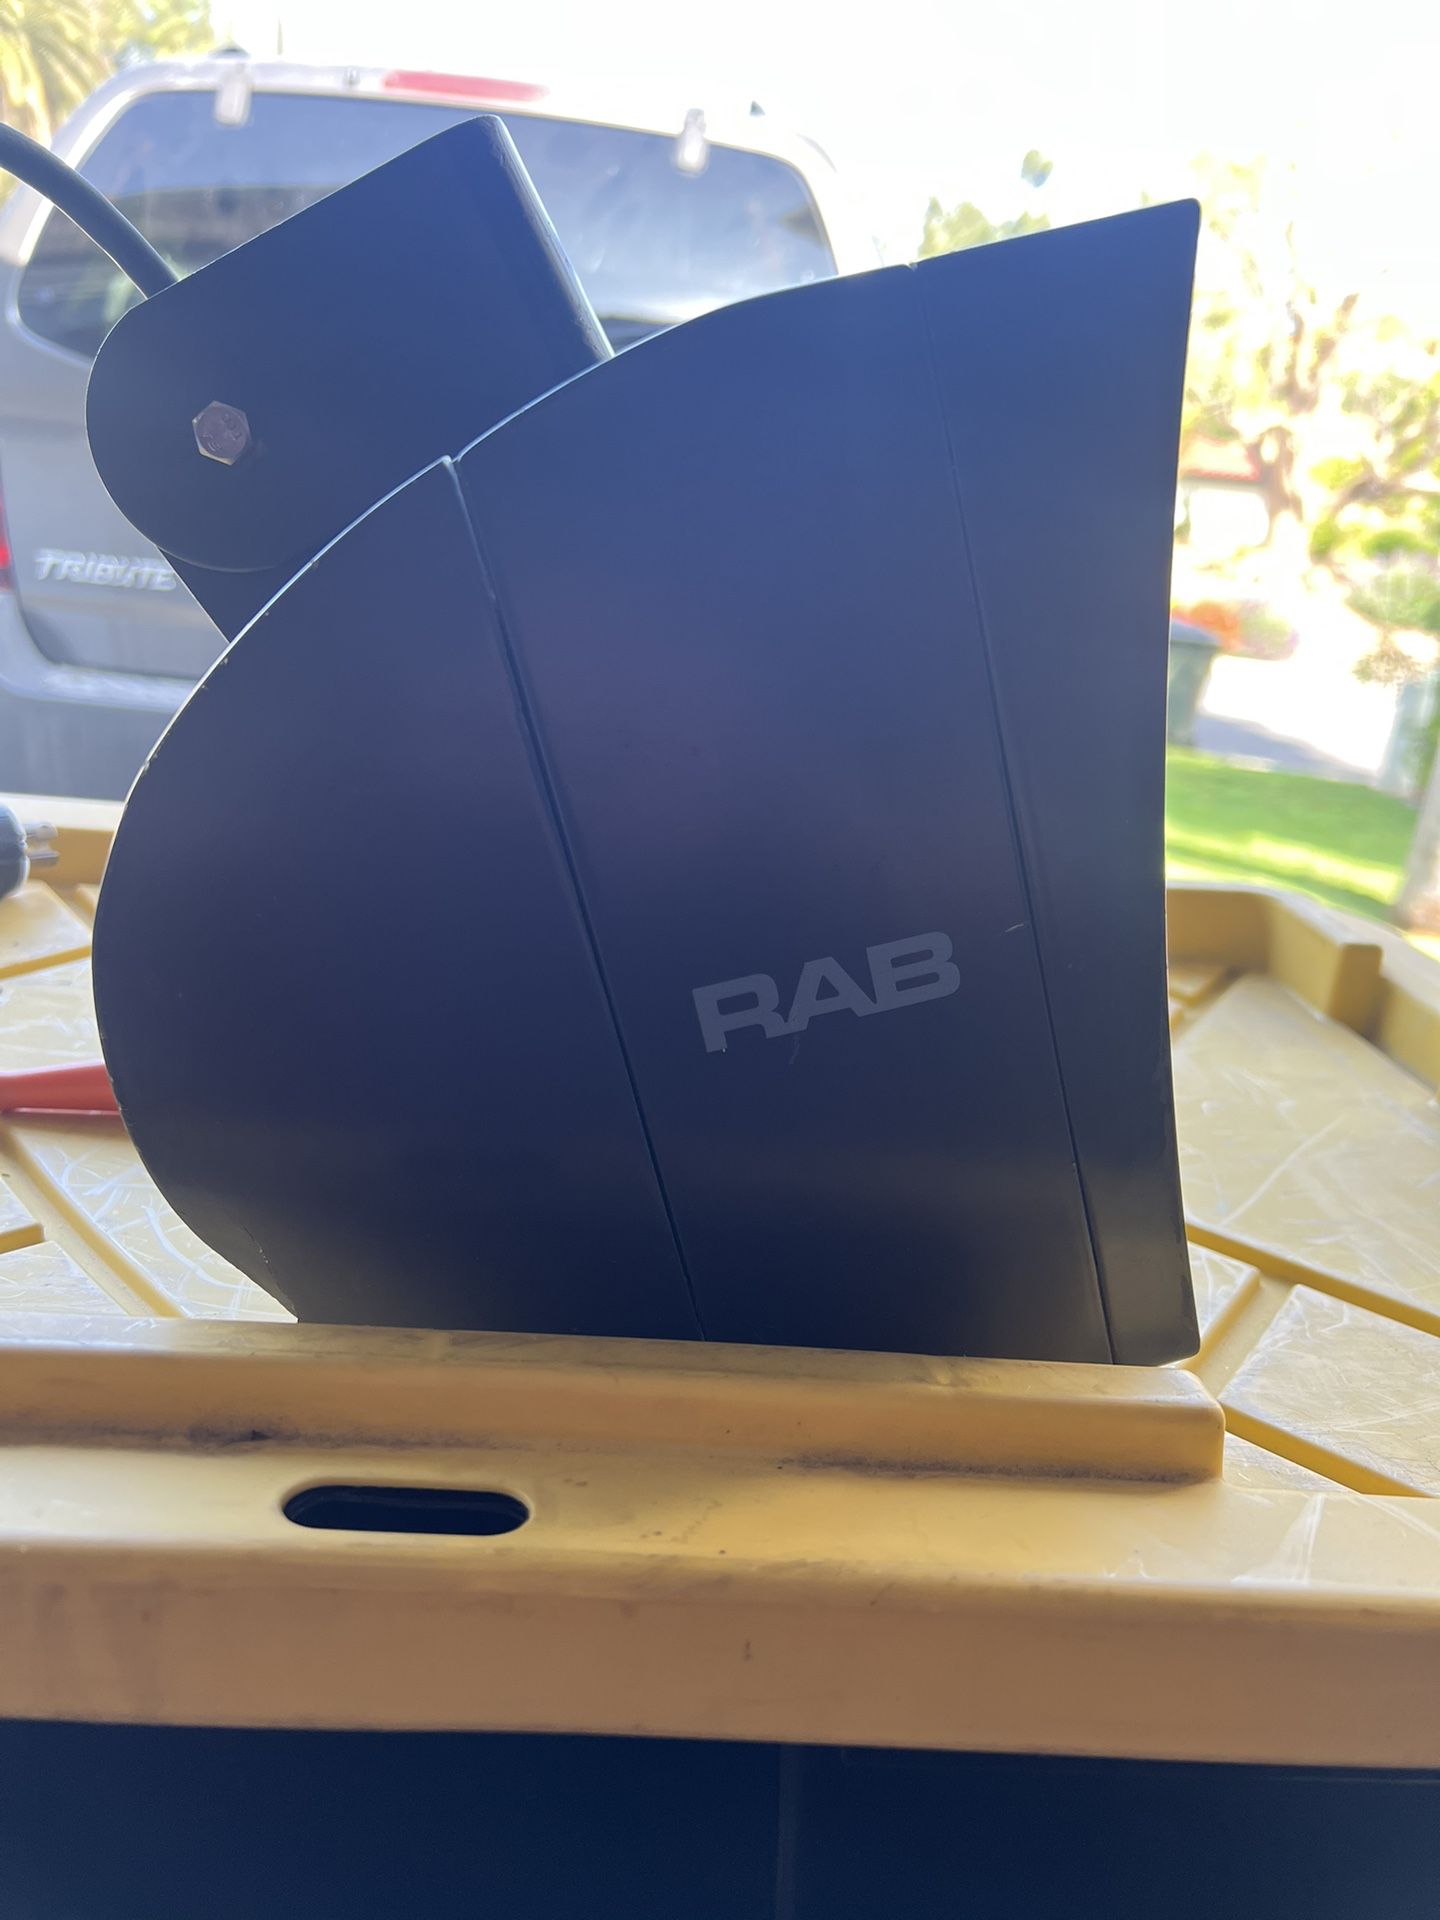 RAB LED Floodlight for Sale in Yorba Linda, CA OfferUp